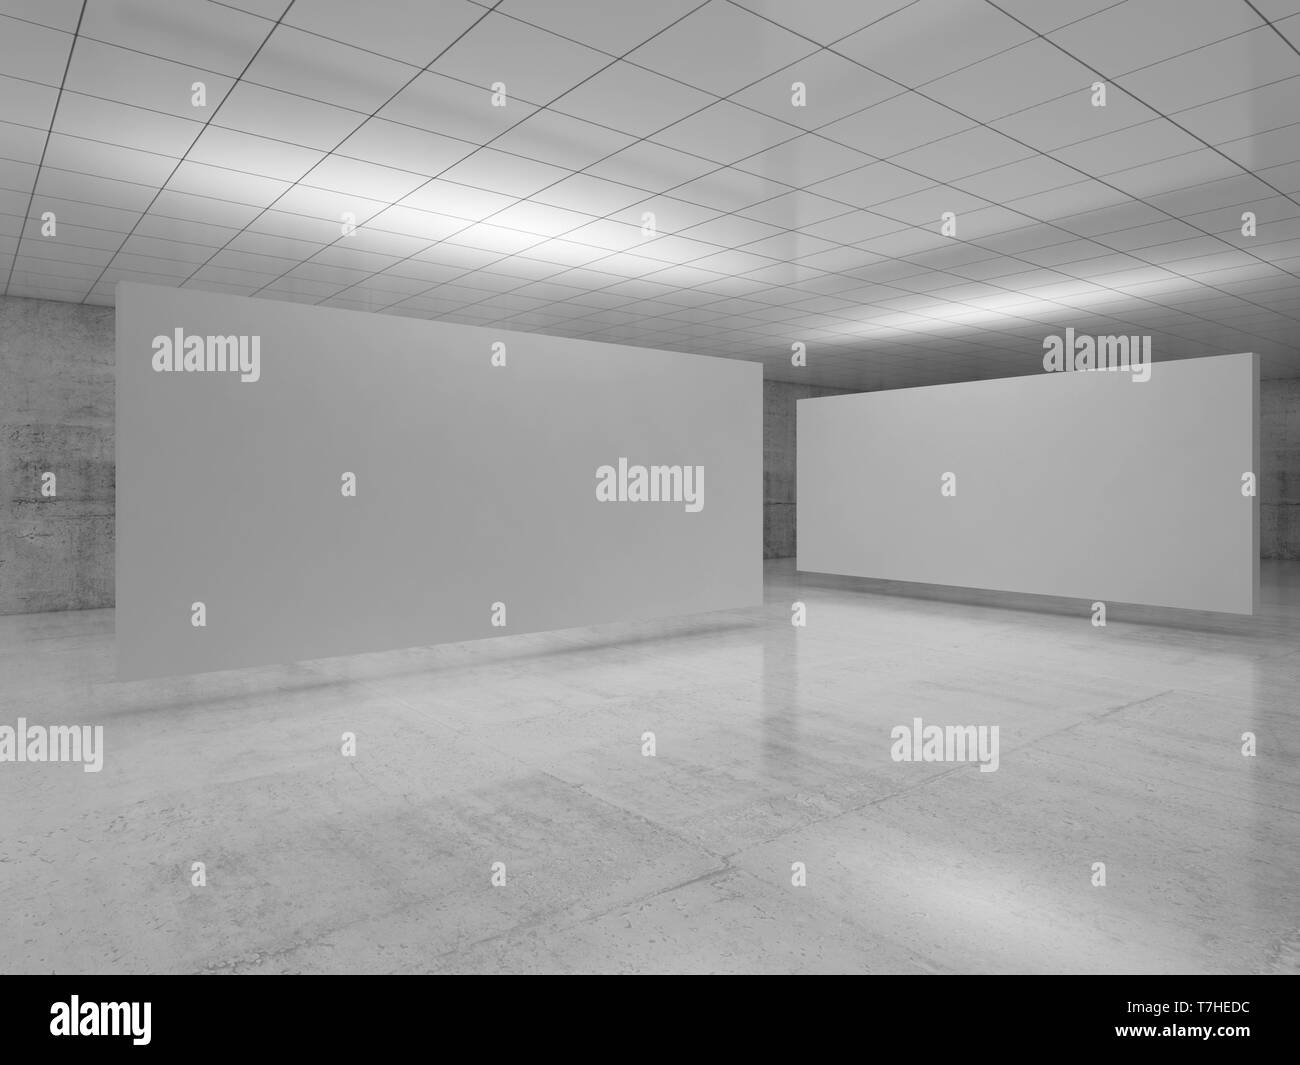 Abstract empty minimalist interior design, white stands installation levitating in exhibition gallery with walls made of polished concrete and shiny c Stock Photo